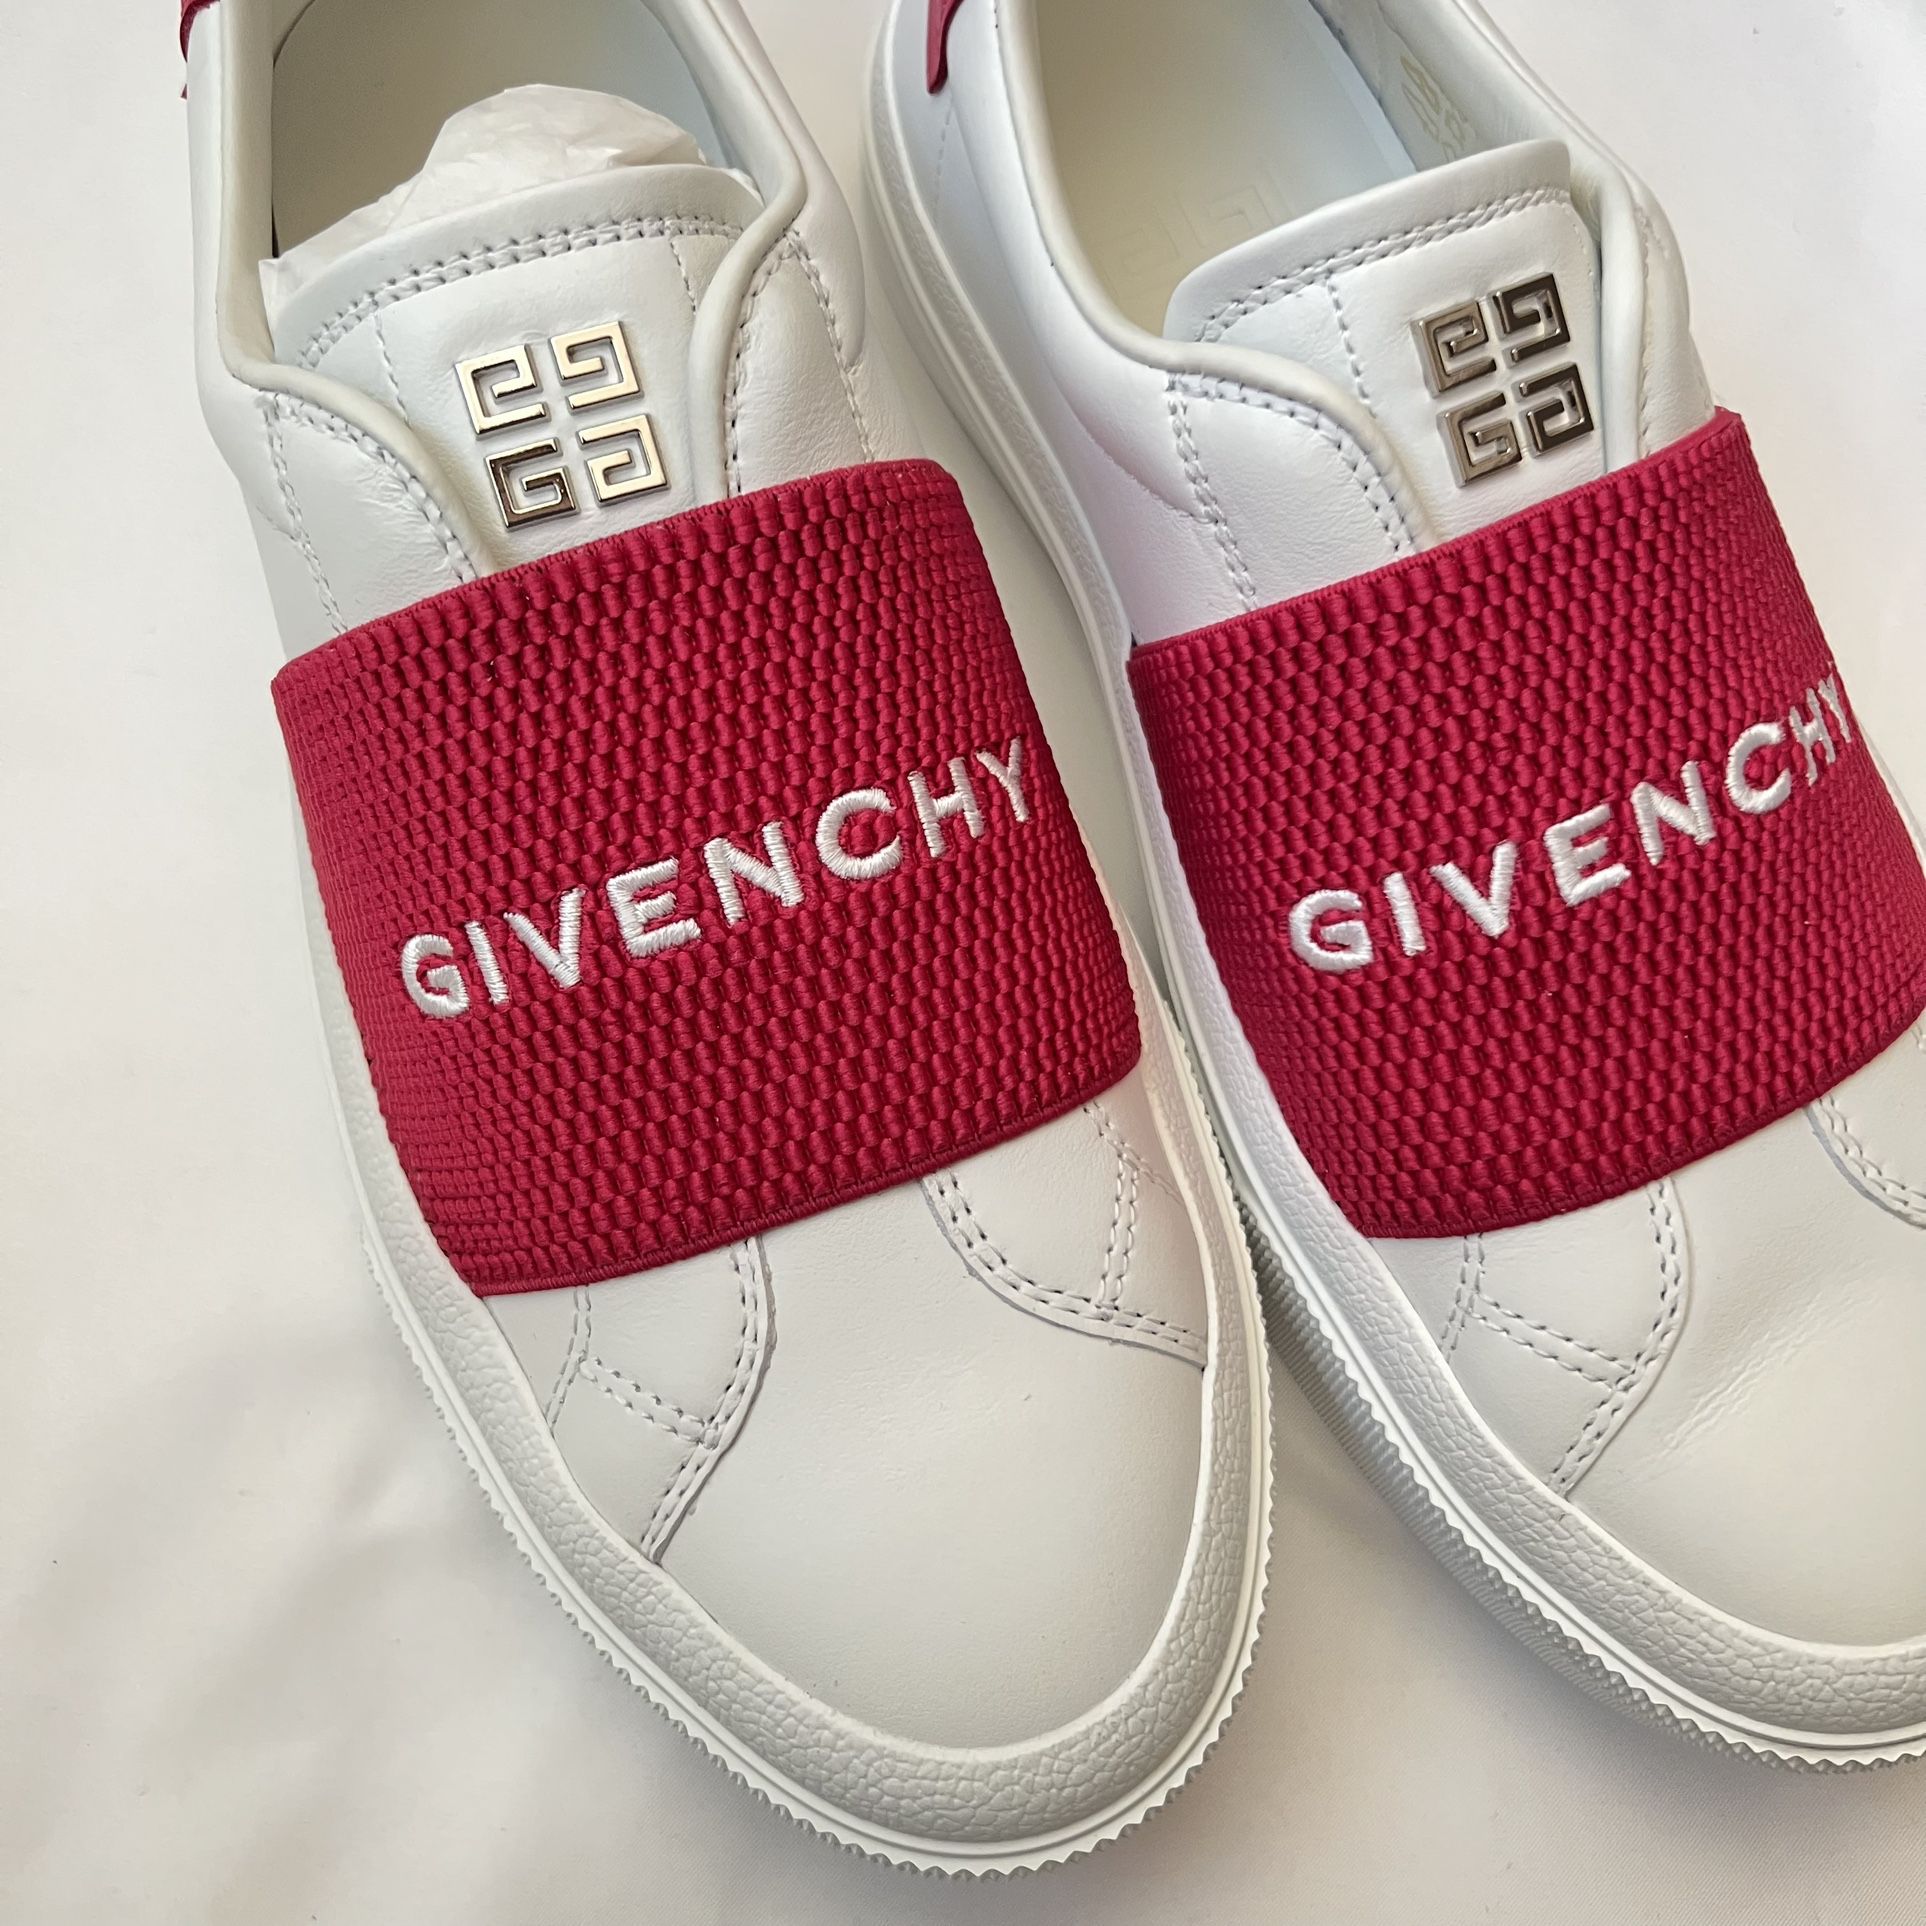 Givenchy City sport leather sneakers womens 7.5, 8.5, 9